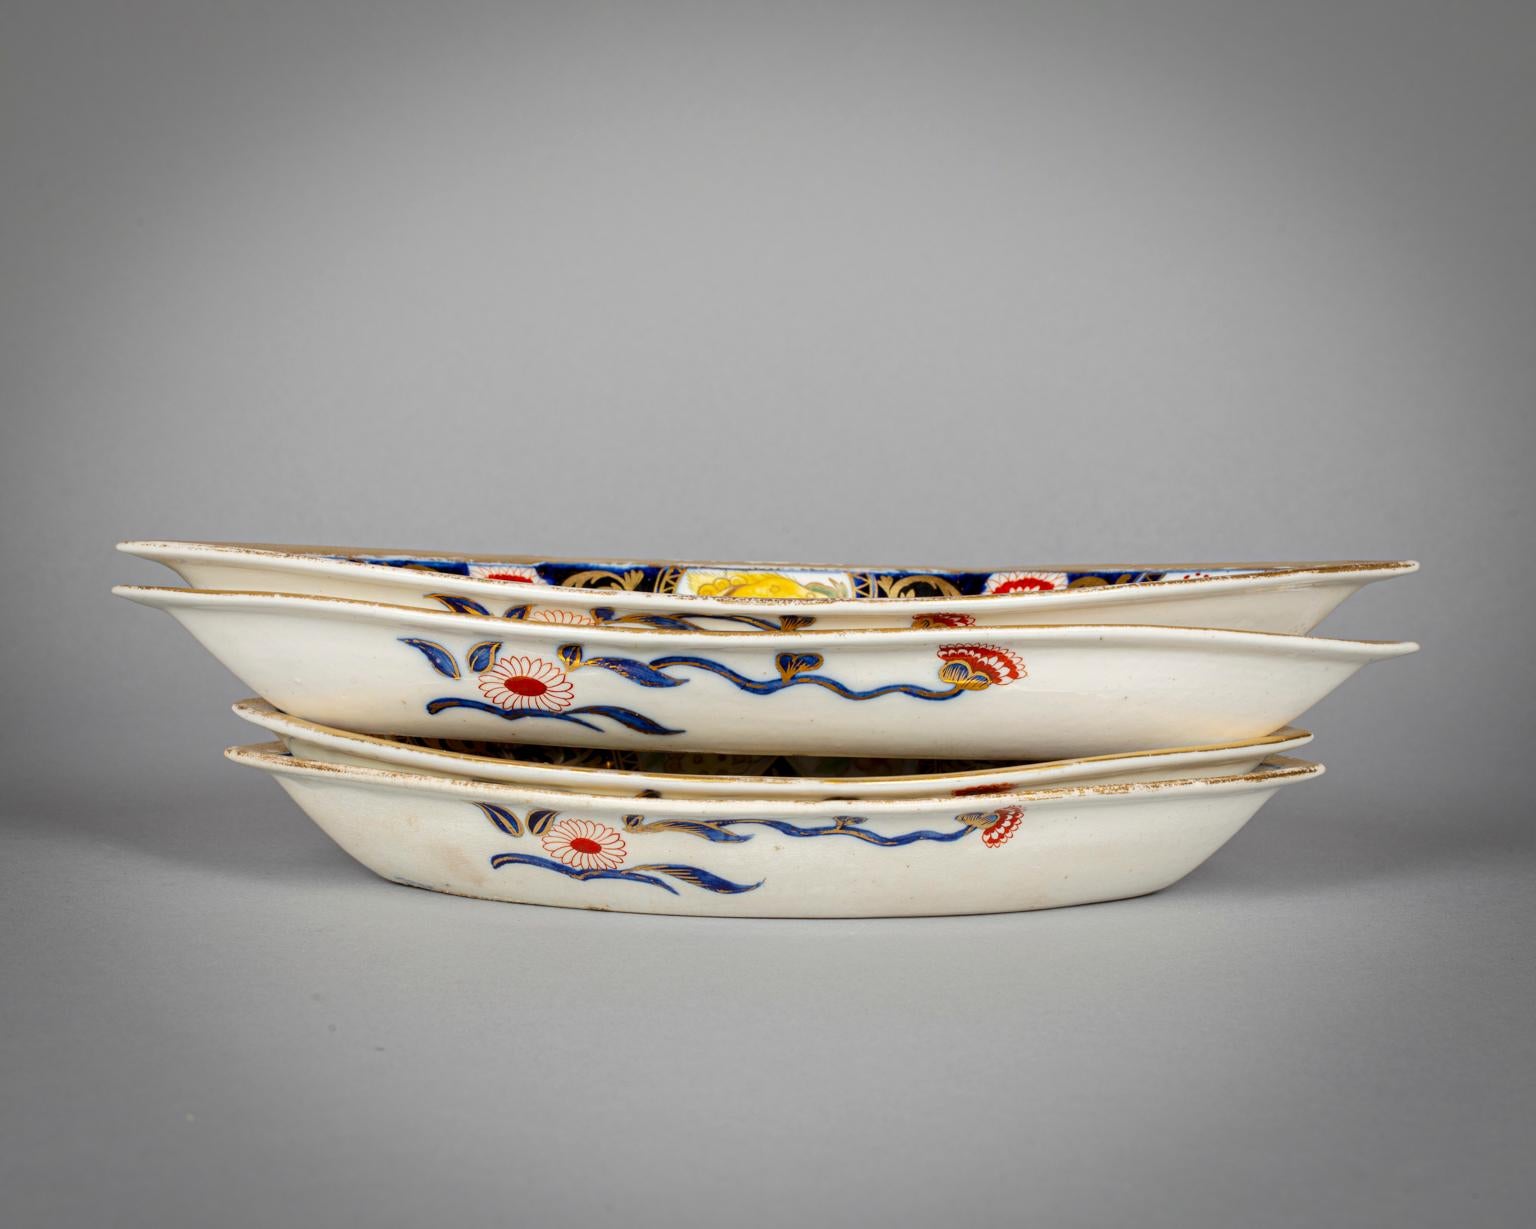 English Porcelain Five-Part Serving Set on a Wooden Tray, circa 1830 For Sale 1